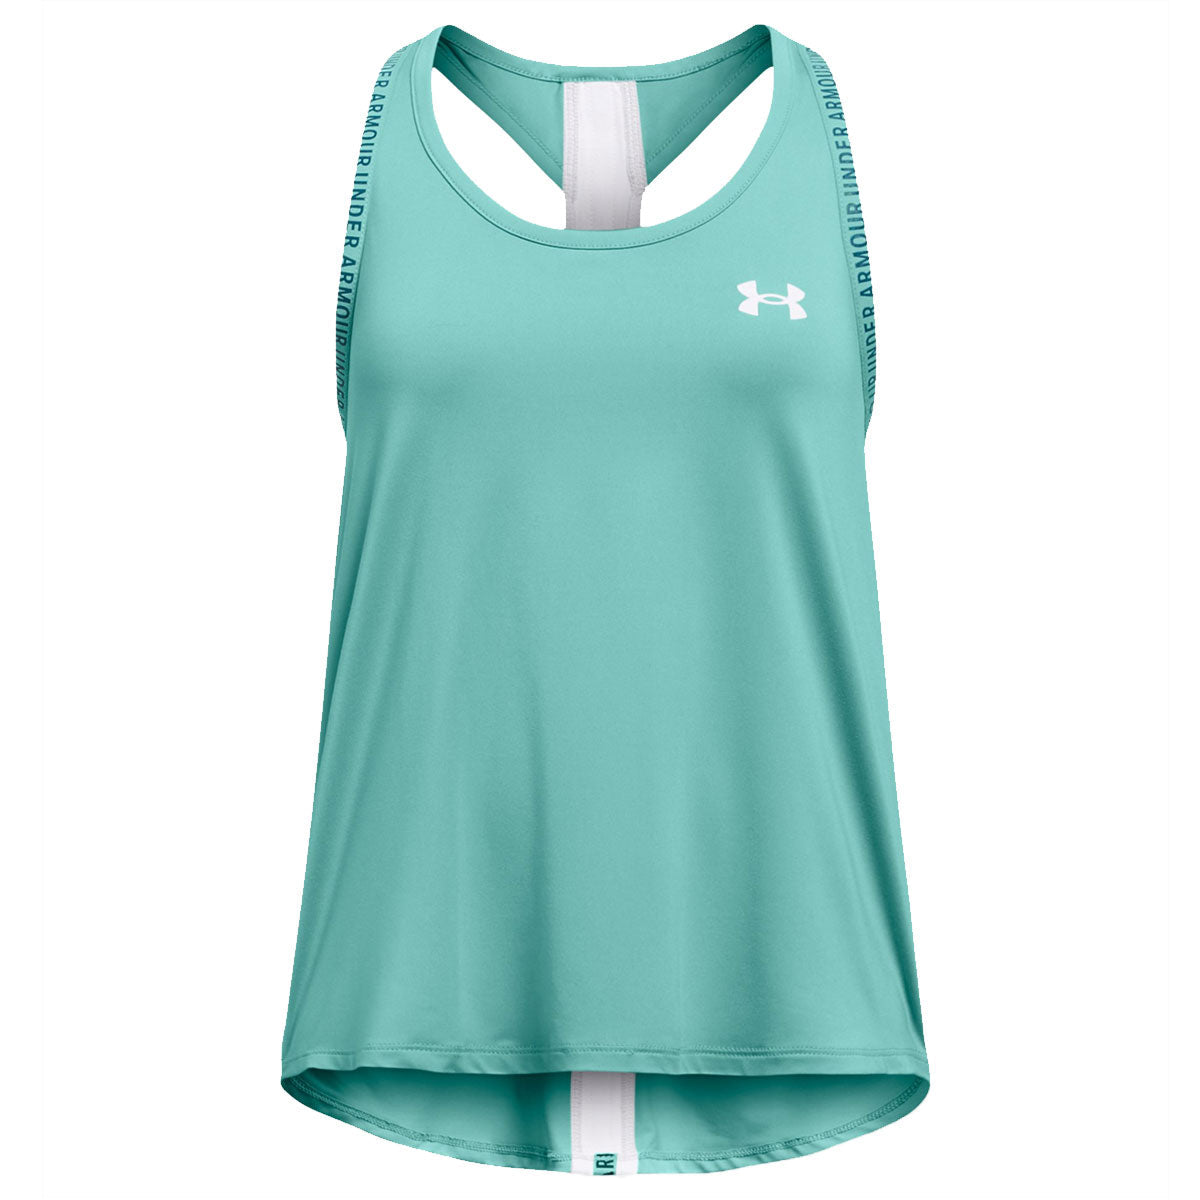 Under Armour Knockout Tank Top - Girls - Radial Turquoise/White